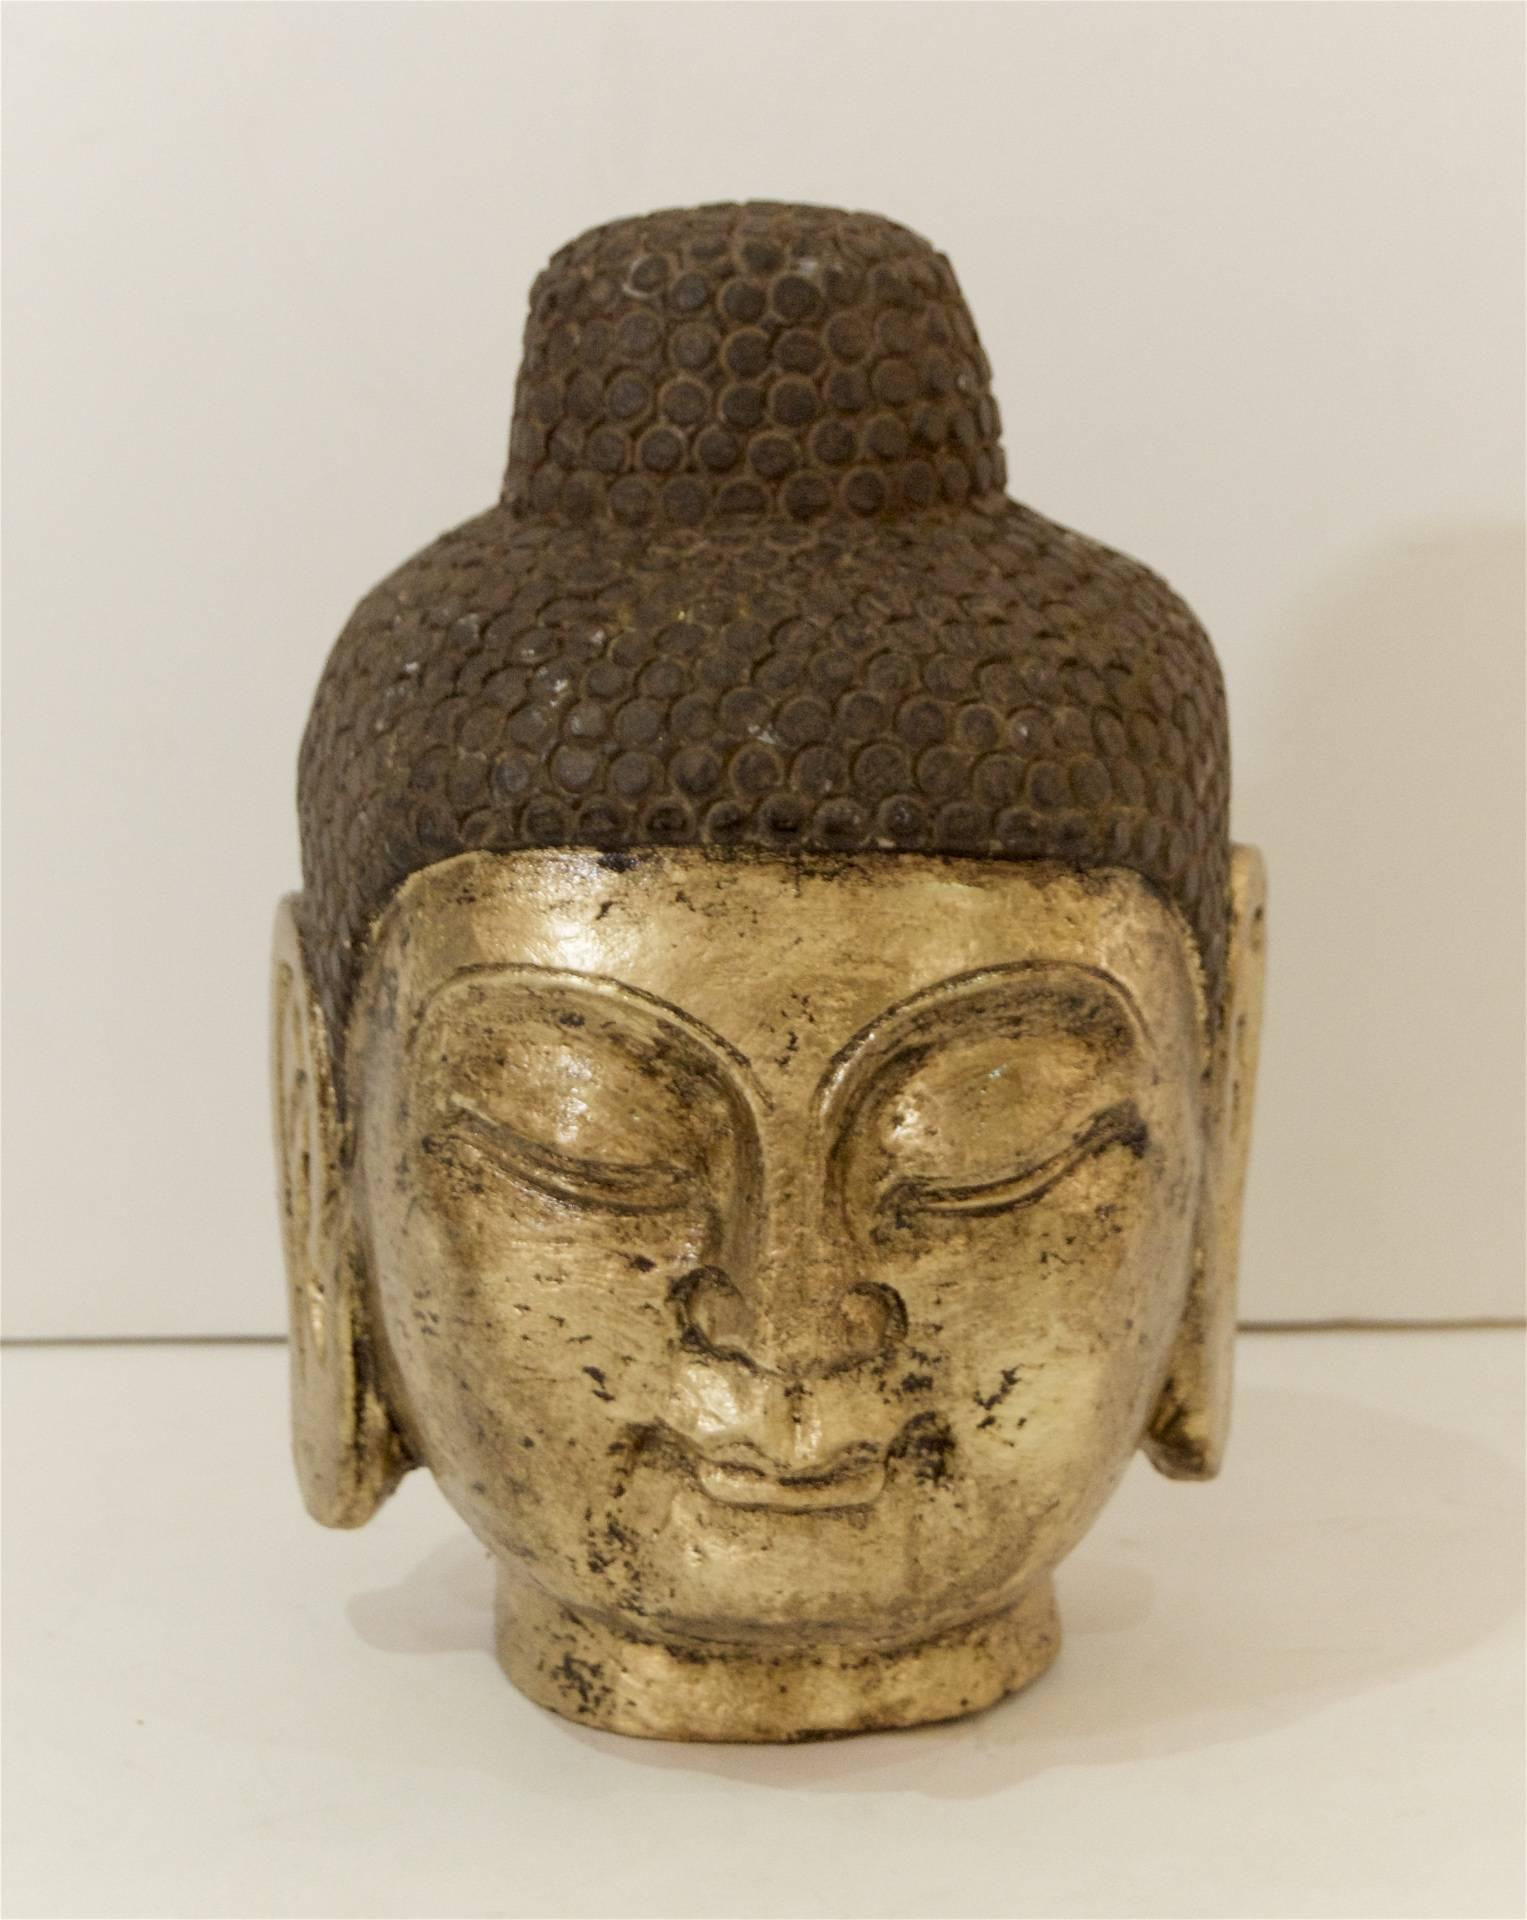 Excellent Buddha head of carved stone with gilt face. 

Uncertain age of creation, no later than early 20th century.